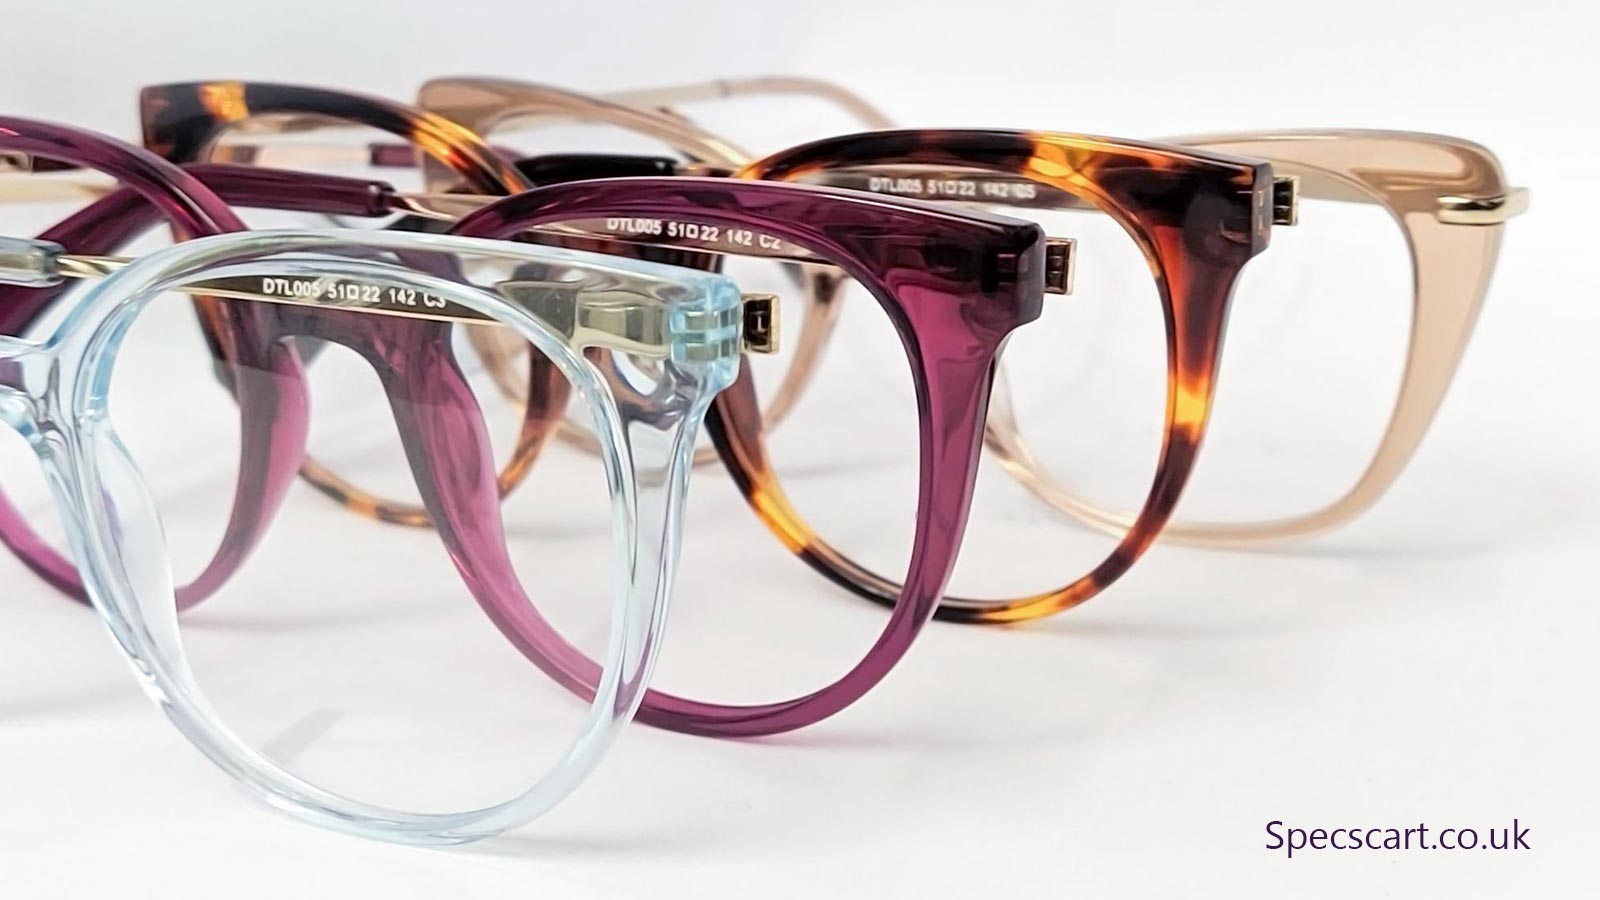 Modern Twist in the traditional glasses